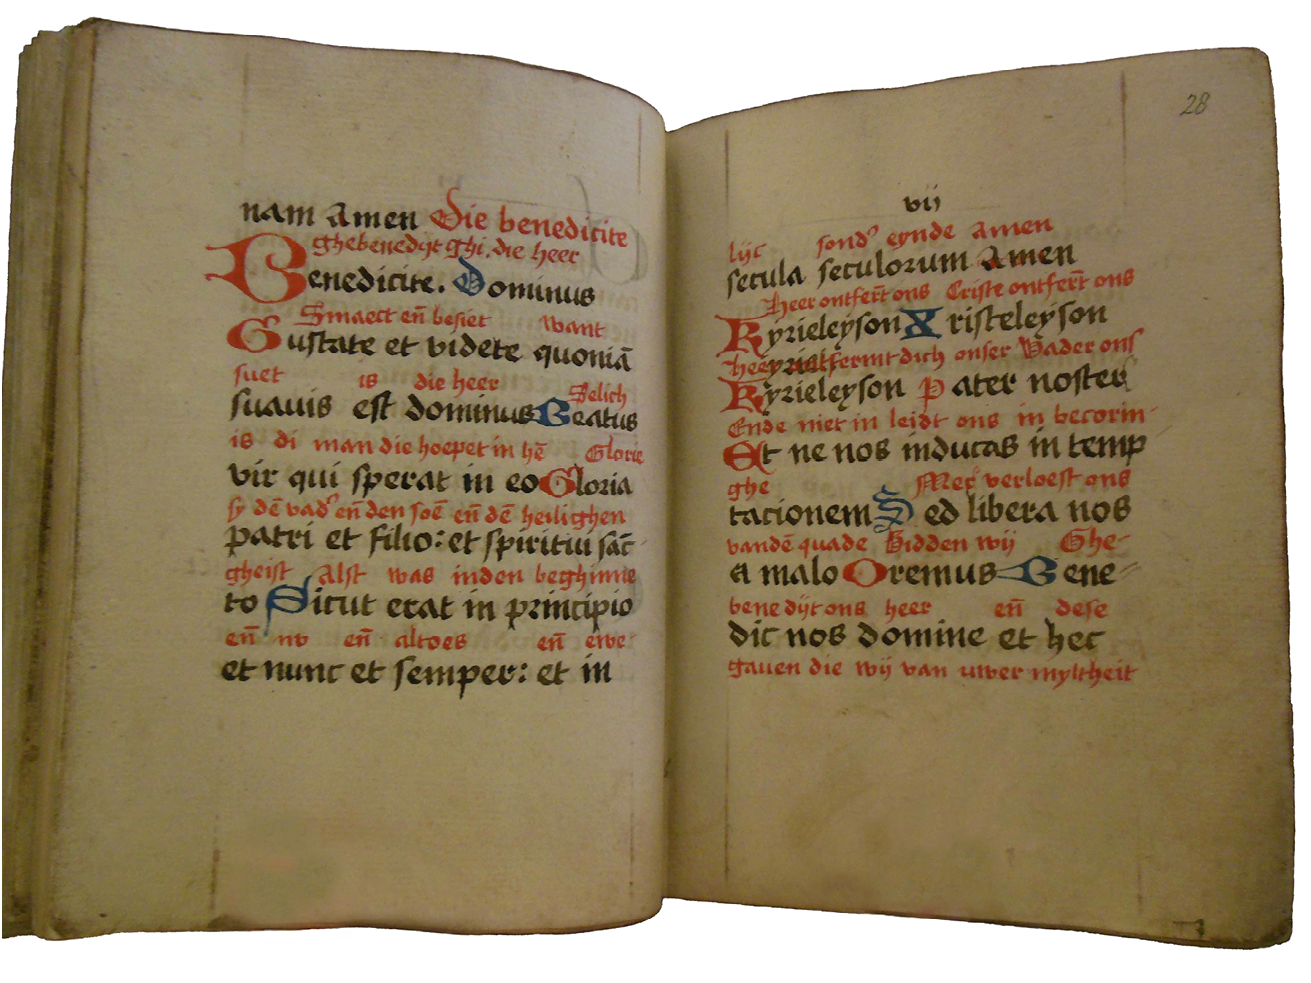 Fig. 90  Opening in the beghards’ book of hours: the beginning of the benediction, with interlineal rubricated translation. London, British Library, Add. Ms. 24332, fol. 27v-28r (modern foliation).